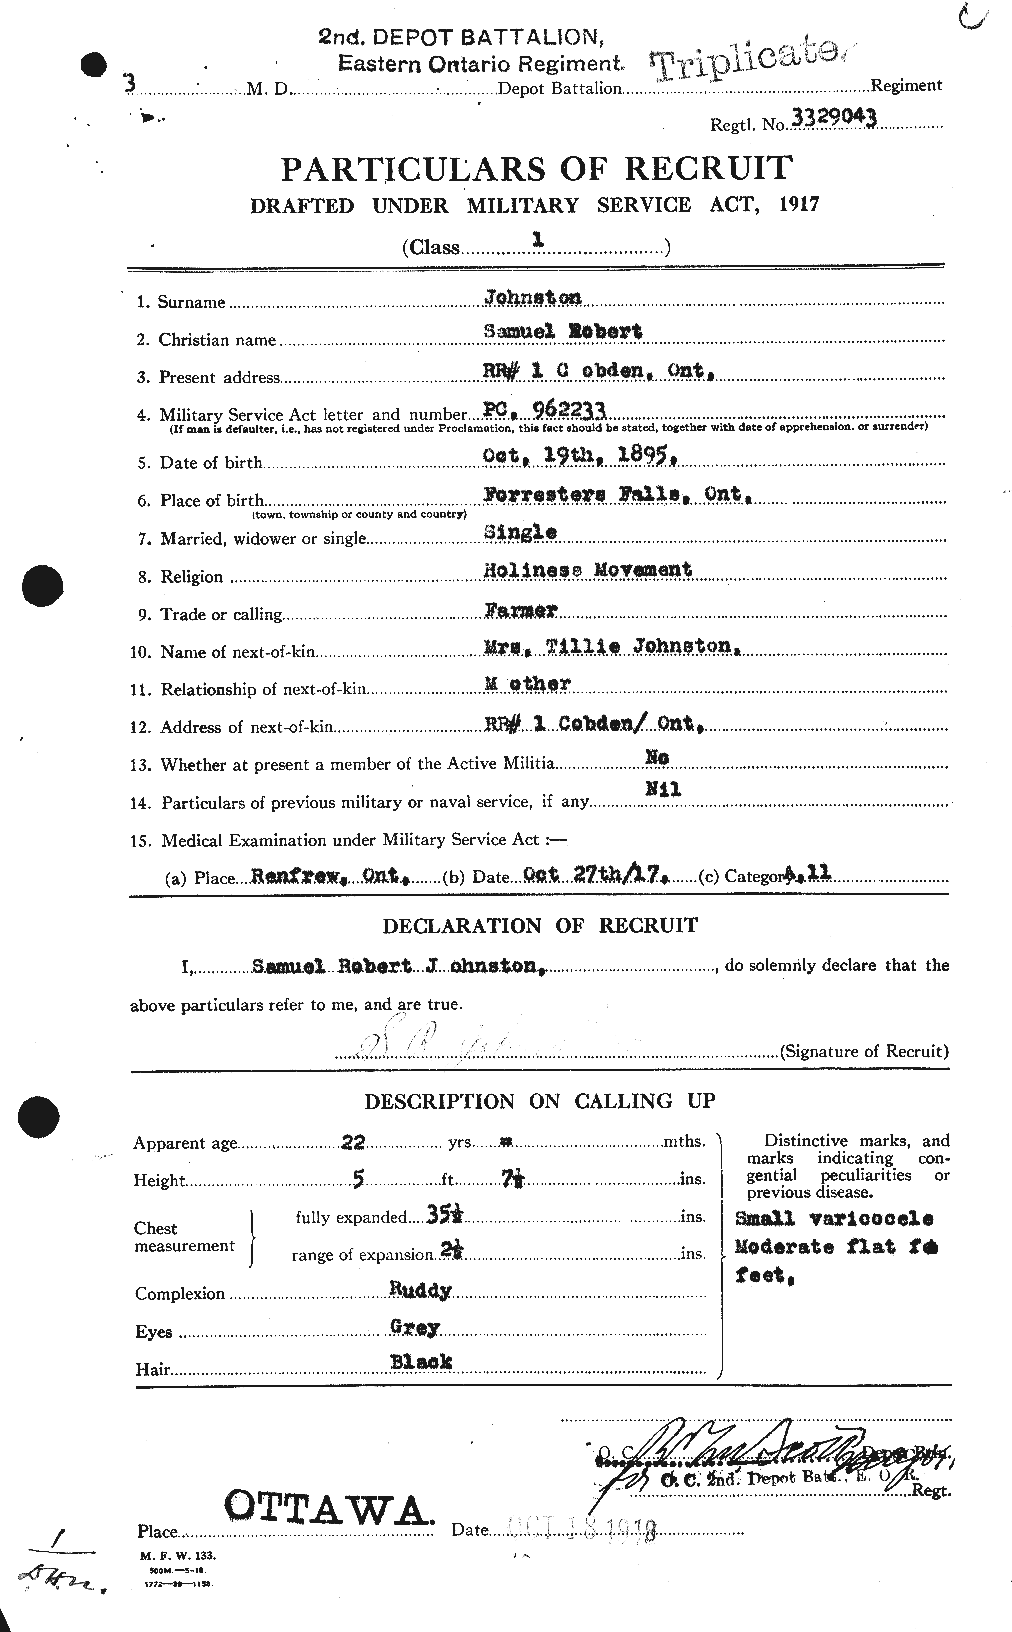 Personnel Records of the First World War - CEF 427089a